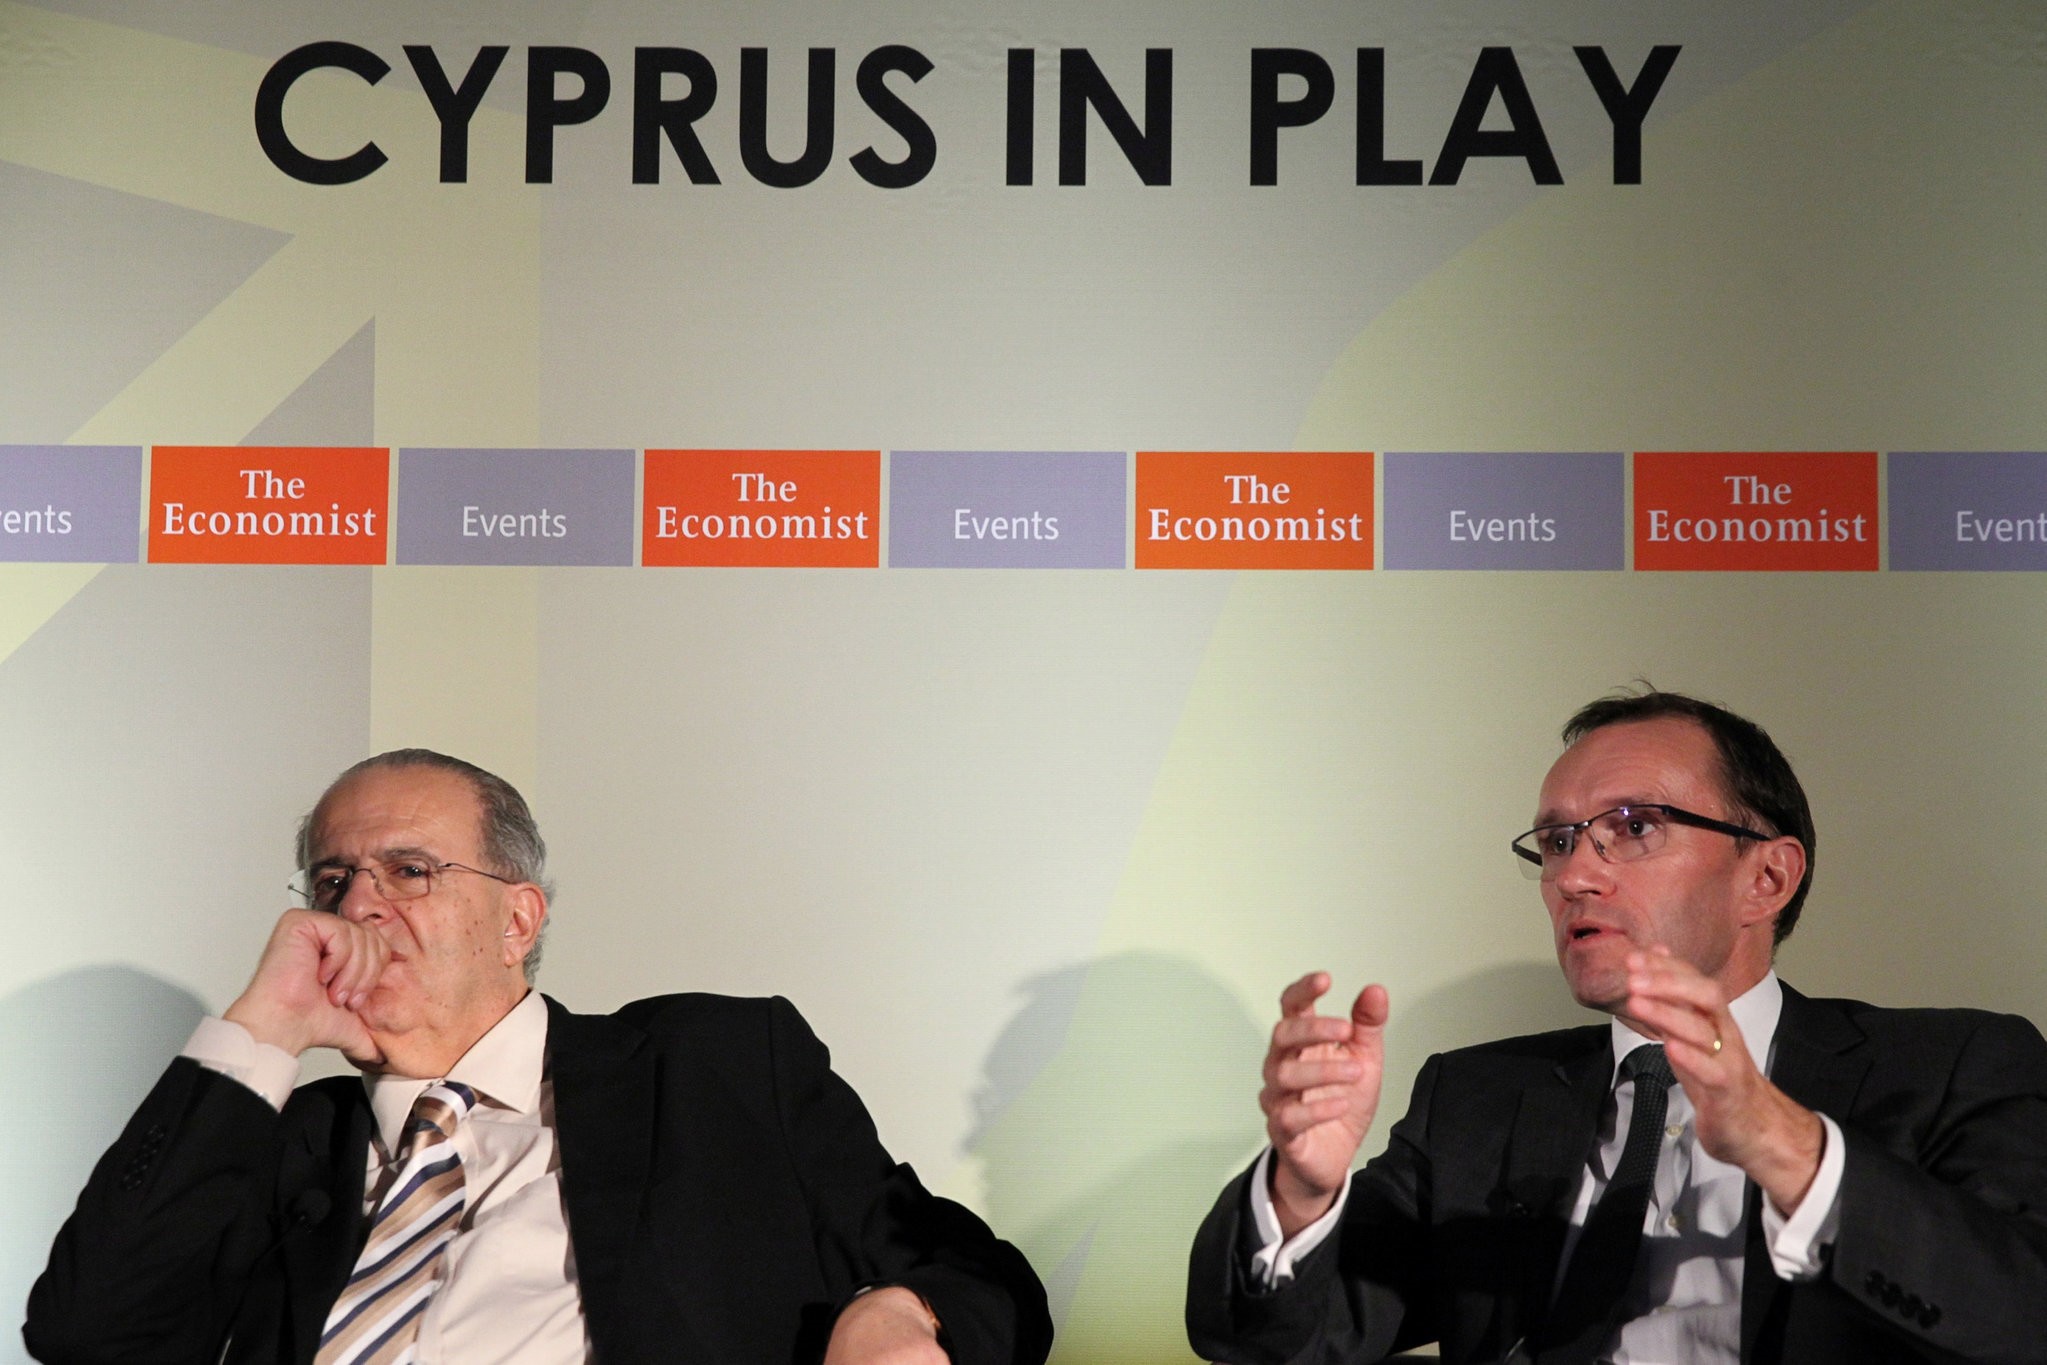 UN envoy Espen Barth Eide (R) and Greek Cypriot Foreign Minister Ioannis Kasoulides attend a conference in Nicosia, Cyprus November 1, 2016. (REUTERS Photo)